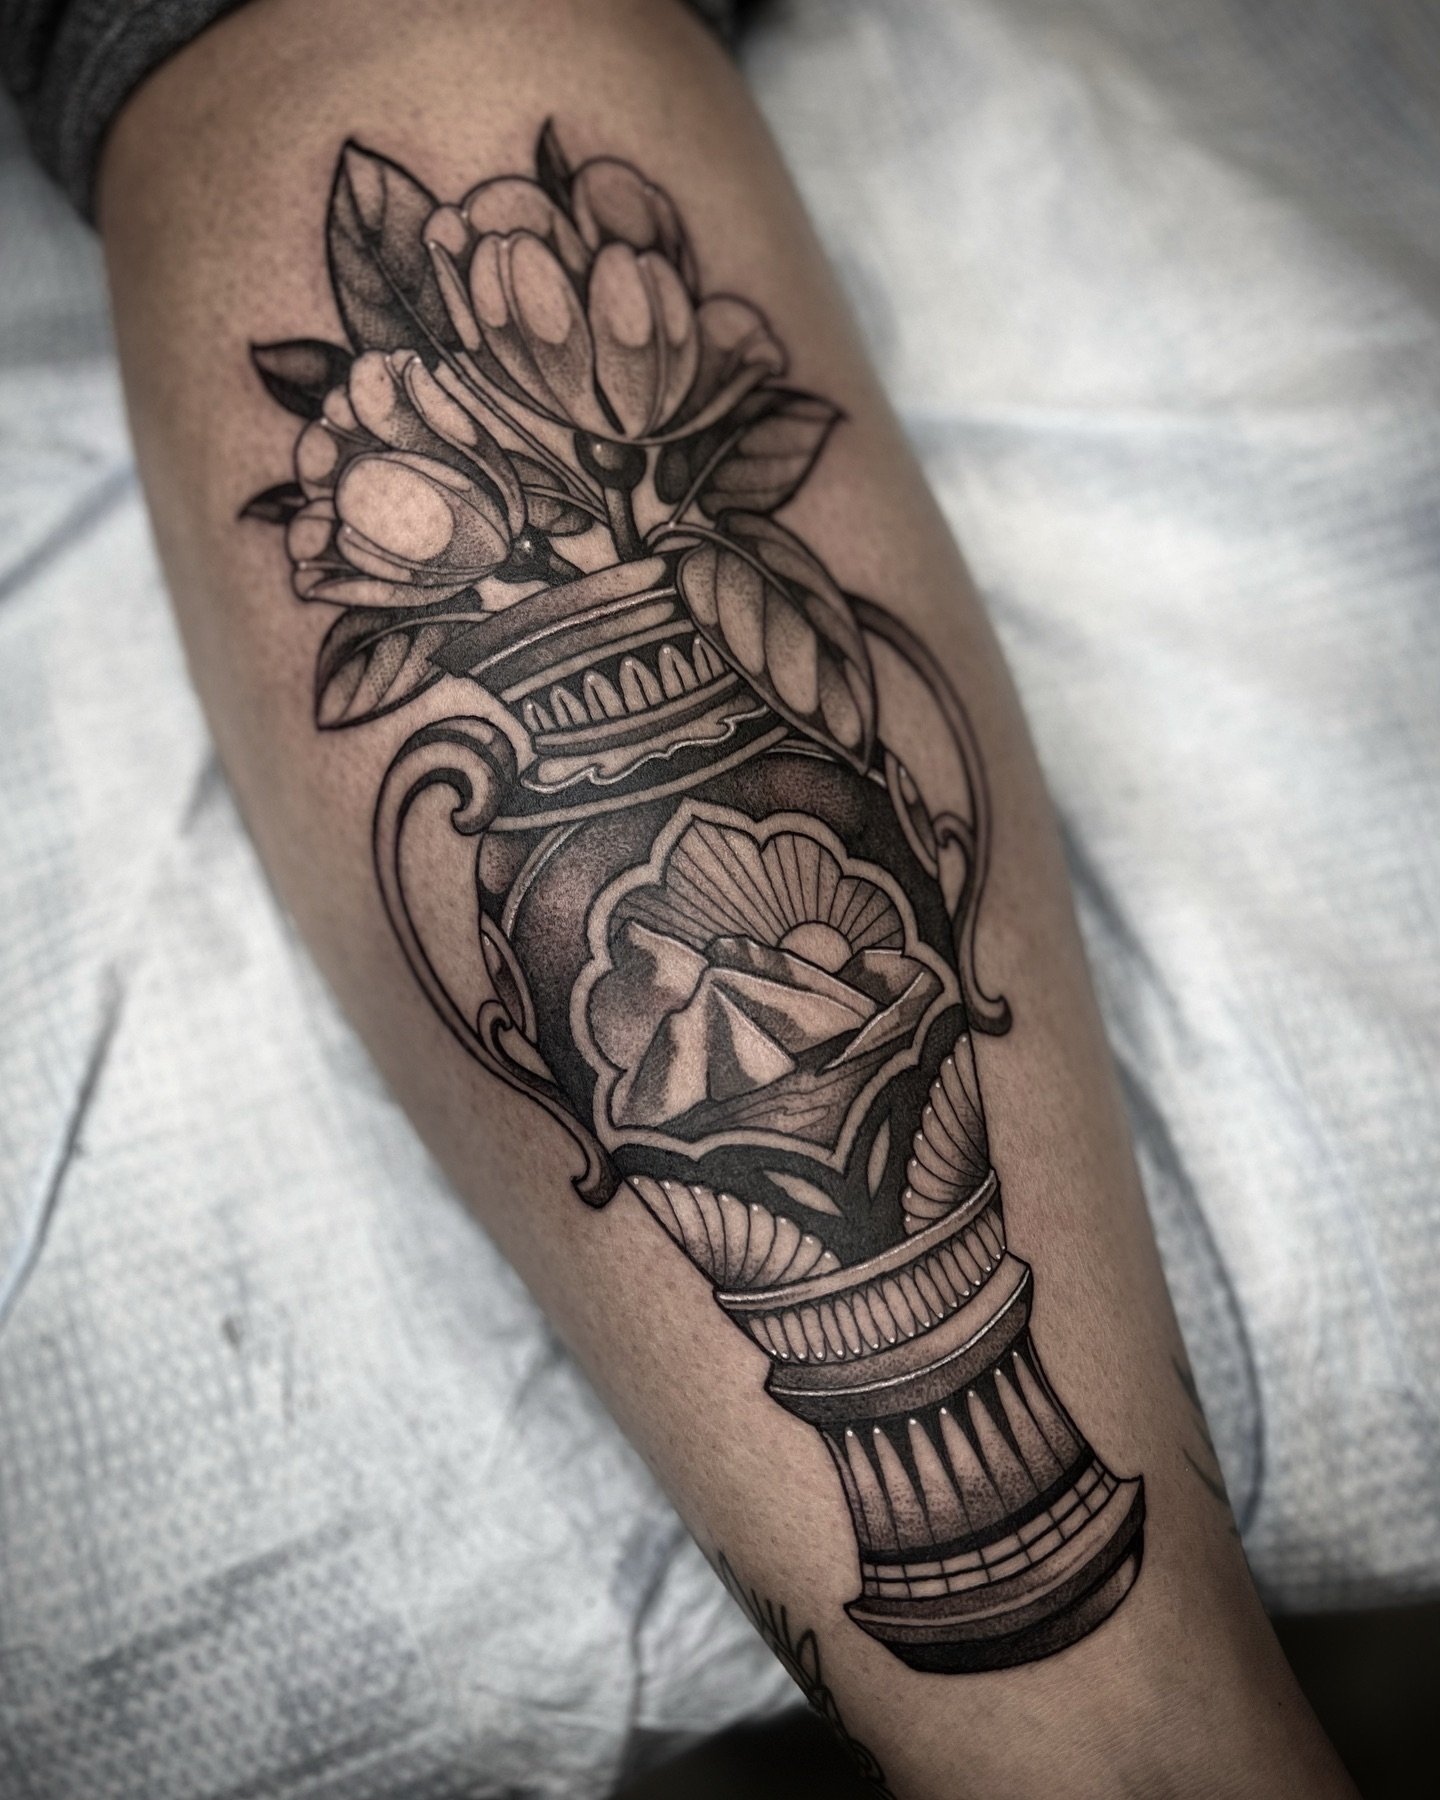 Forgot to post this one from the @newenglandtattooexpo because I&rsquo;m a lil dummy :) But here&rsquo;s a mountain vase from my flash book 😊! 
.
.
.
.
#vasetattoo #mountaintattoo #floraltattoo #bouquettattoo #flowertattoo #tuliptattoo #botanicaltat